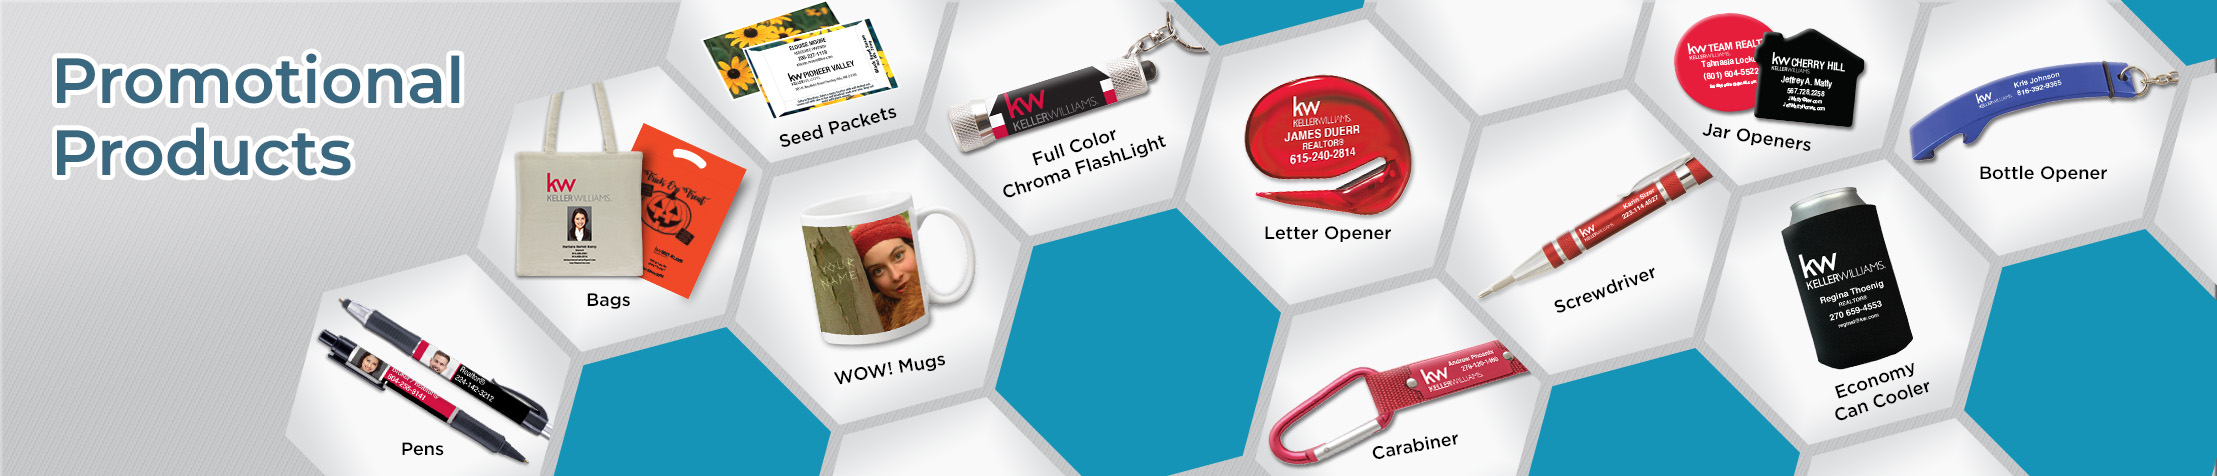 Keller Williams Real Estate Promotional Products - KW approved vendor personalized promotional pens, key chains, tote bags, flashlights, mugs | BestPrintBuy.com